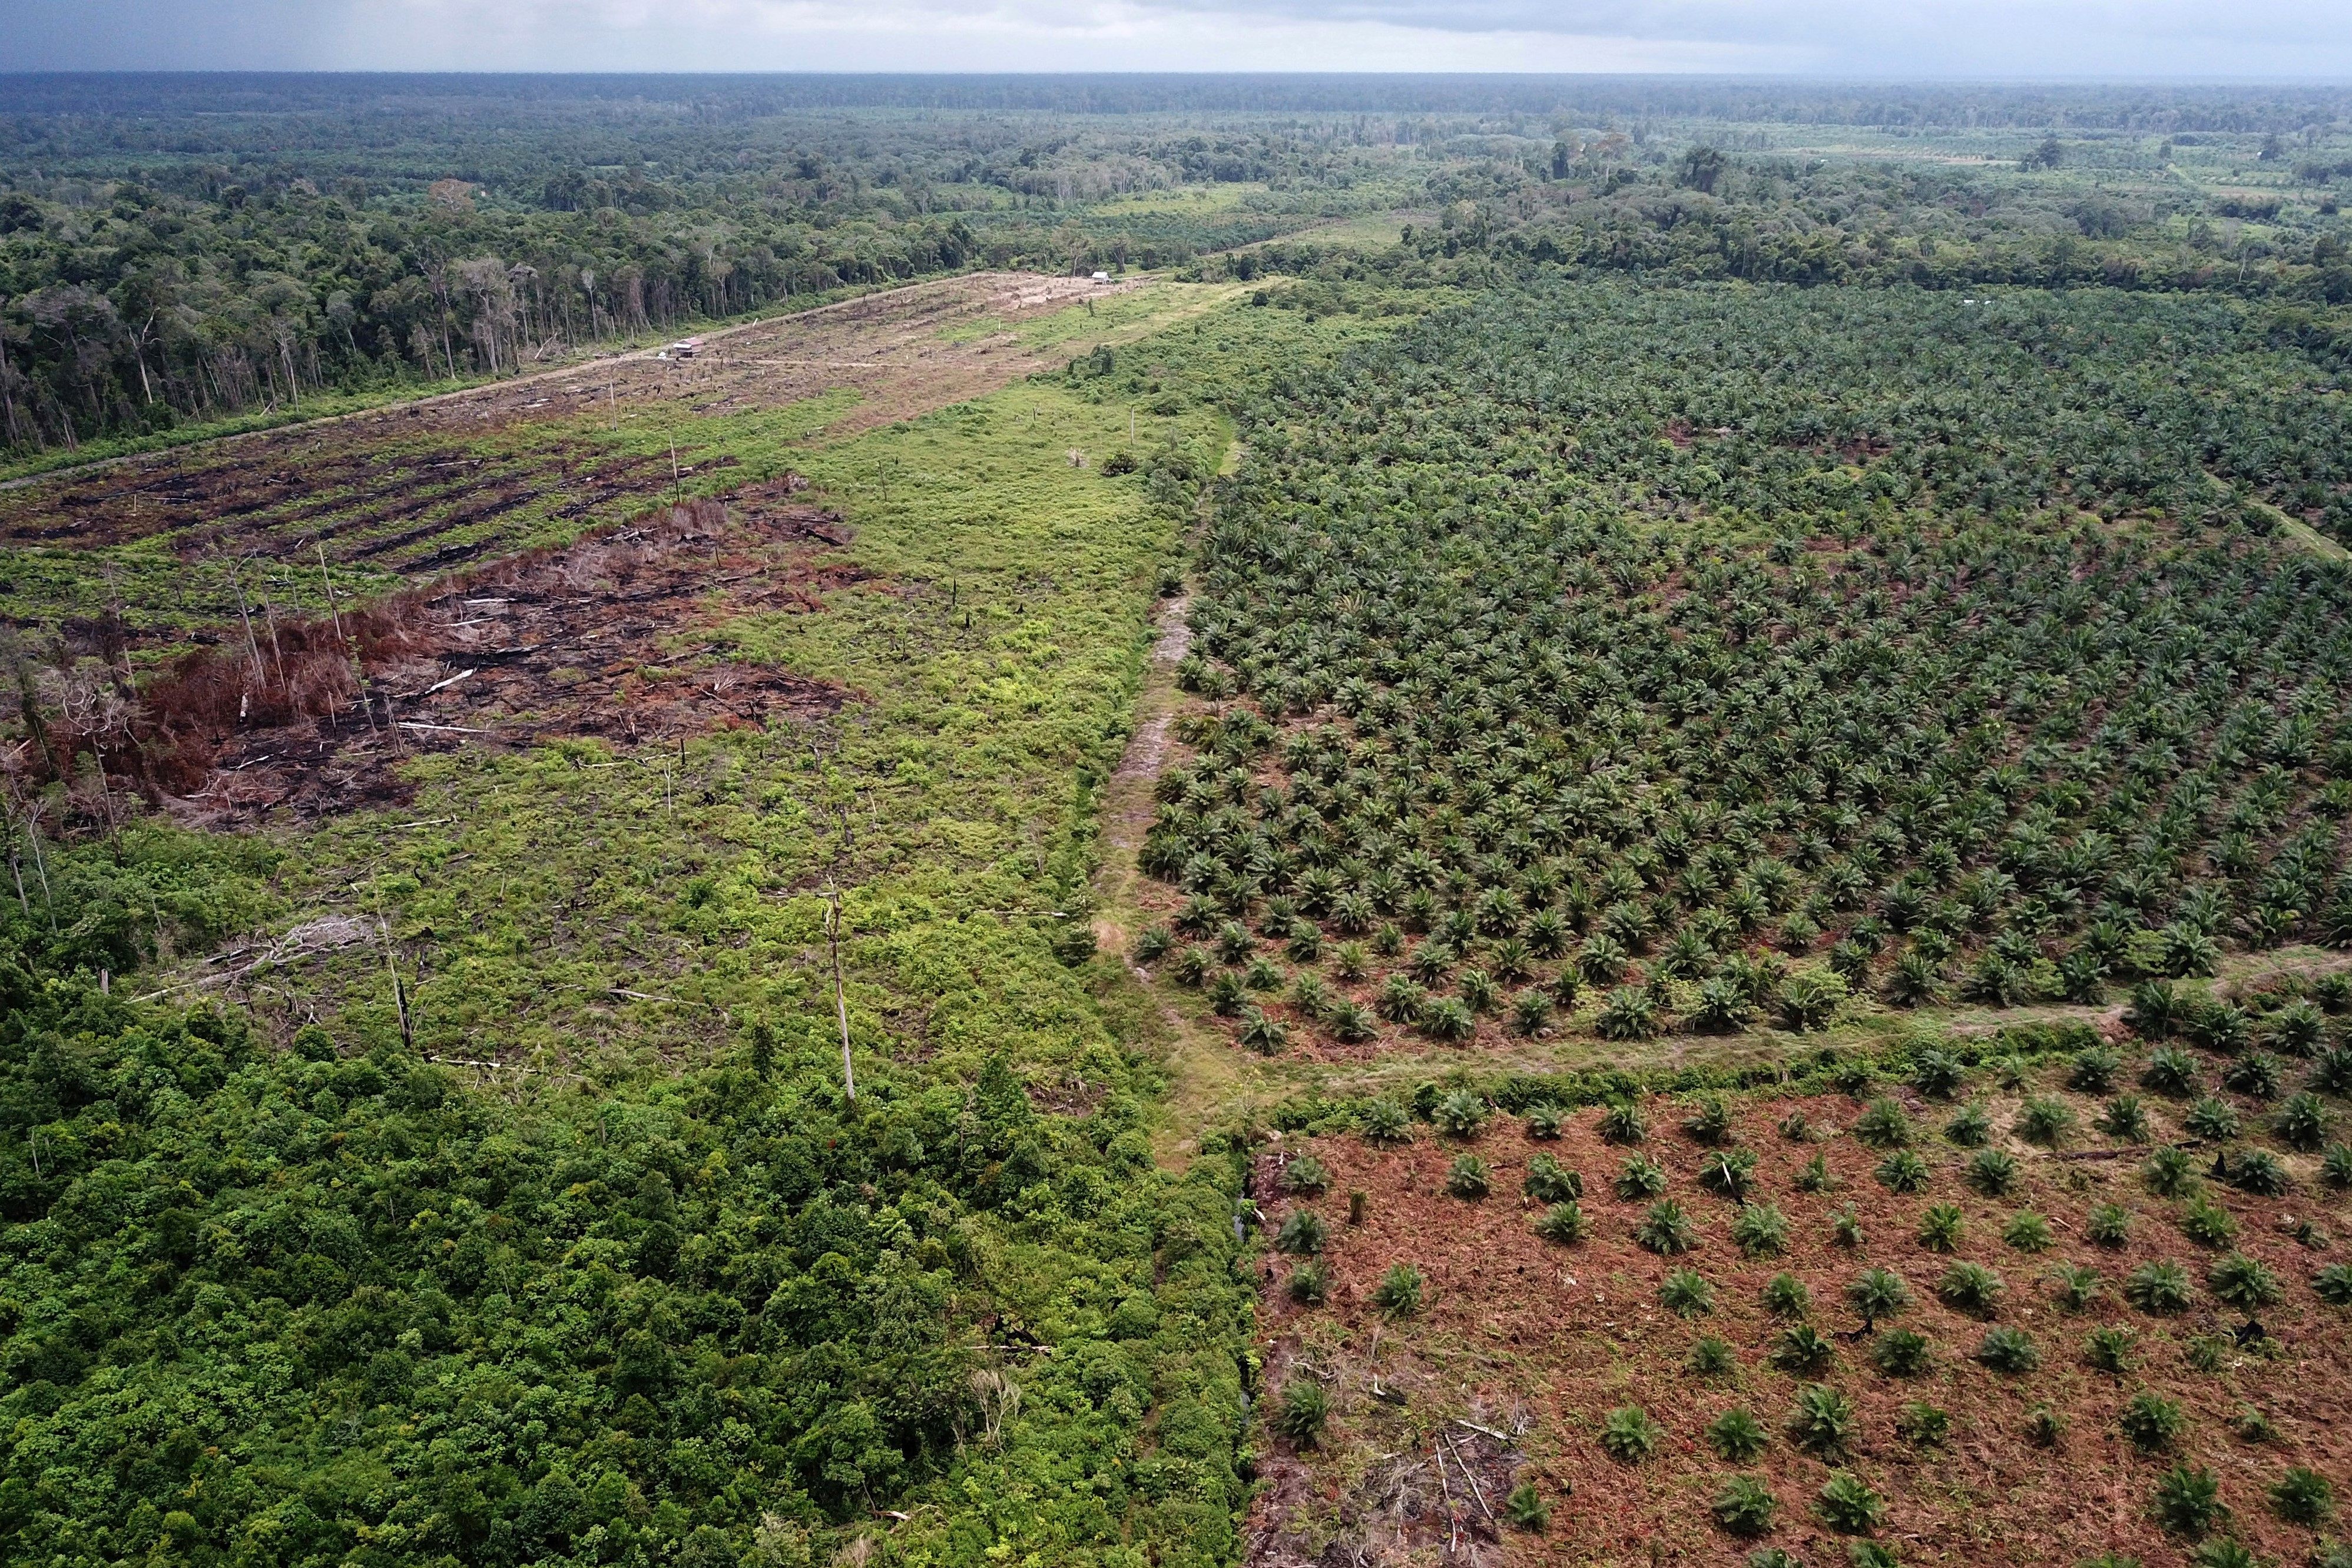 An aerial photo shows a palm oil plantation in a protected area of the Rawa Singkil wildlife reserve in Indonesia in 2018. Photo: AFP